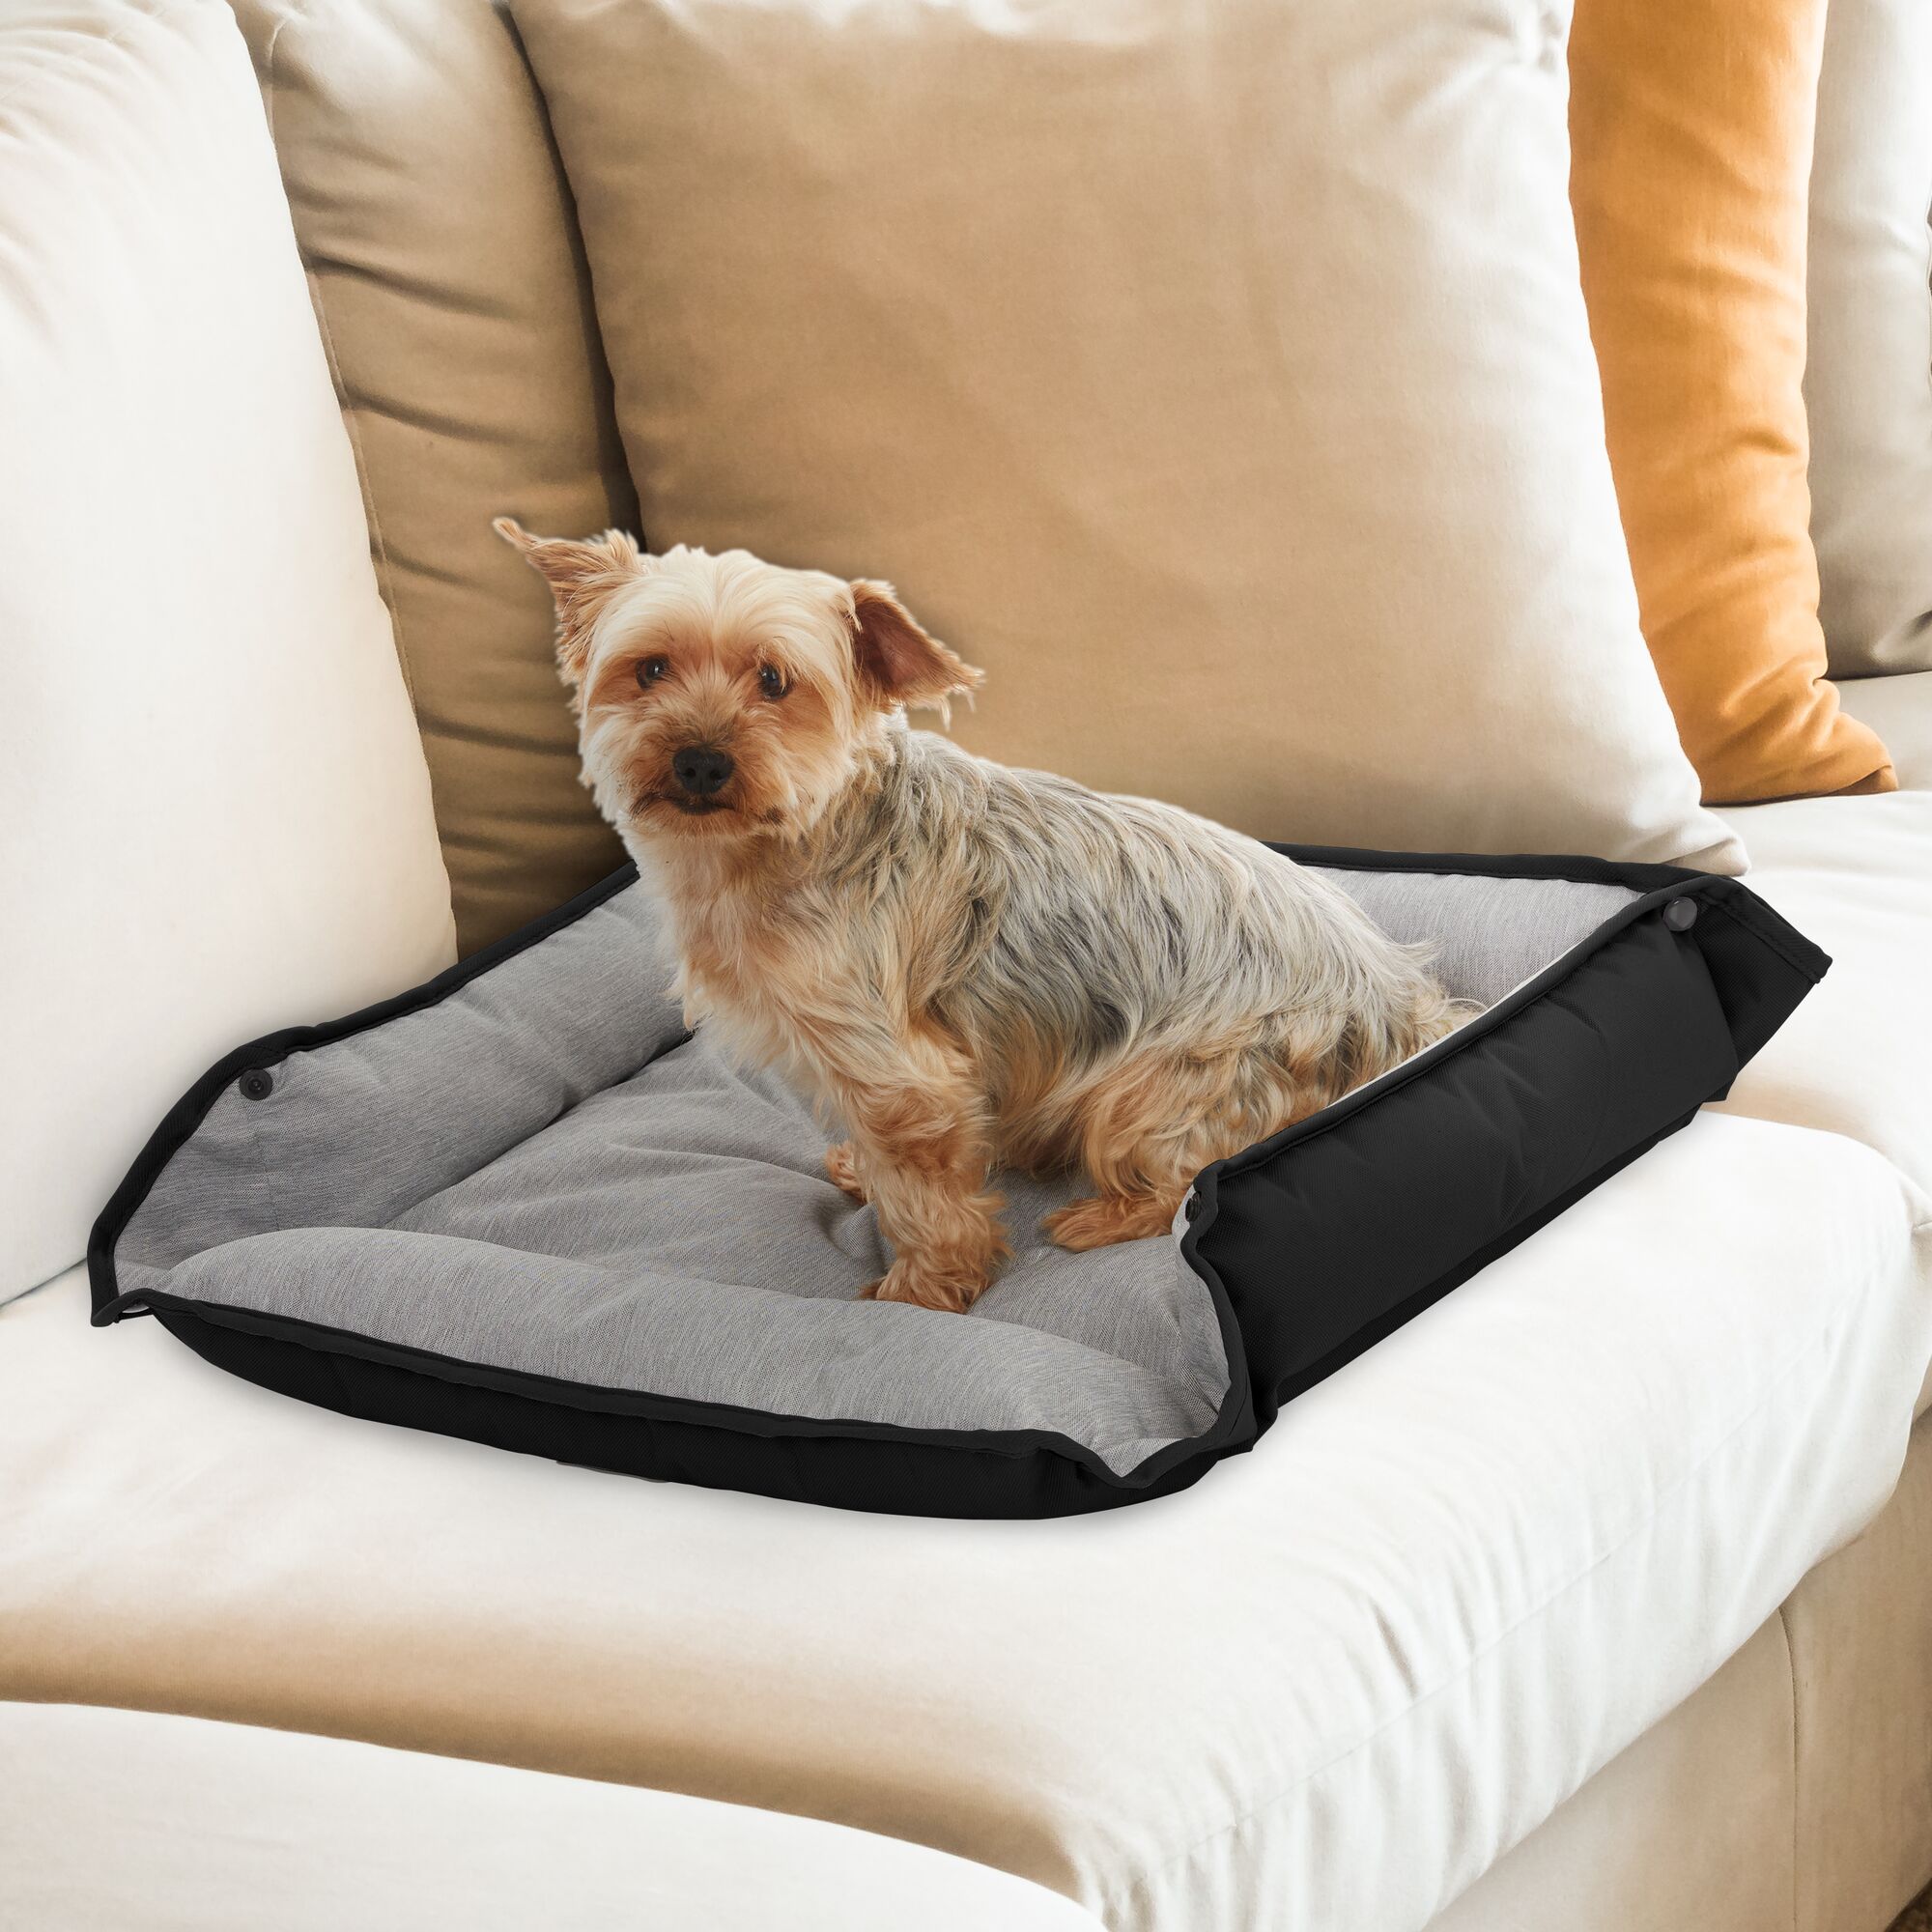 Yorkie dog sitting upon the BLACK+DECKER four sided plush dog bed, which is resting on top of a light colored sofa